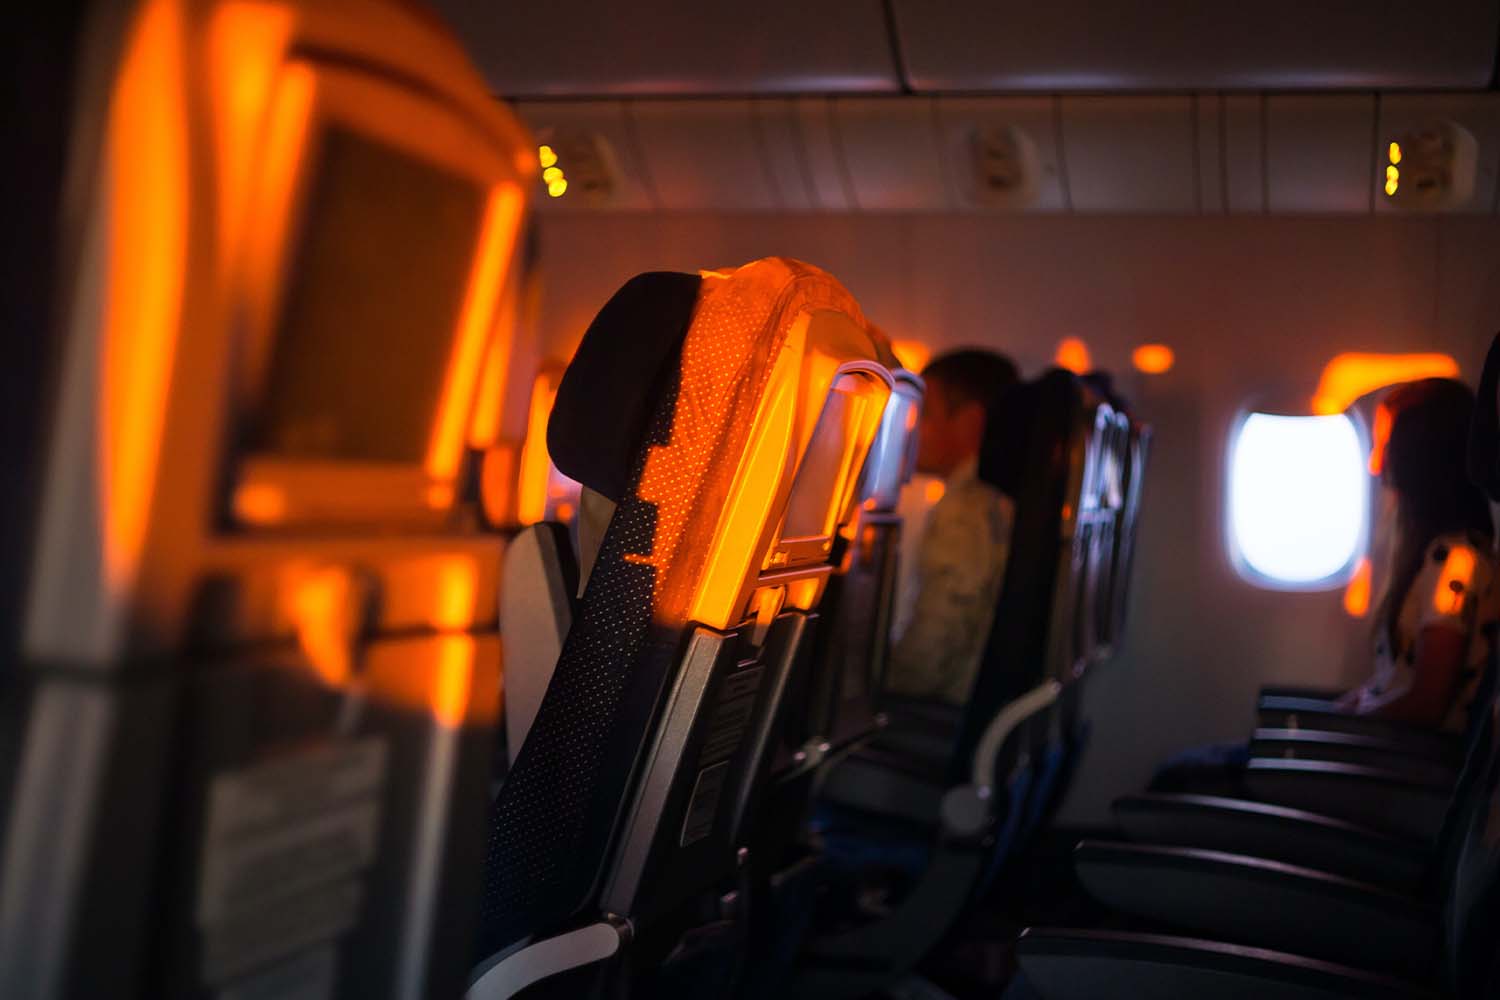 Empty seat in a plane at dusk